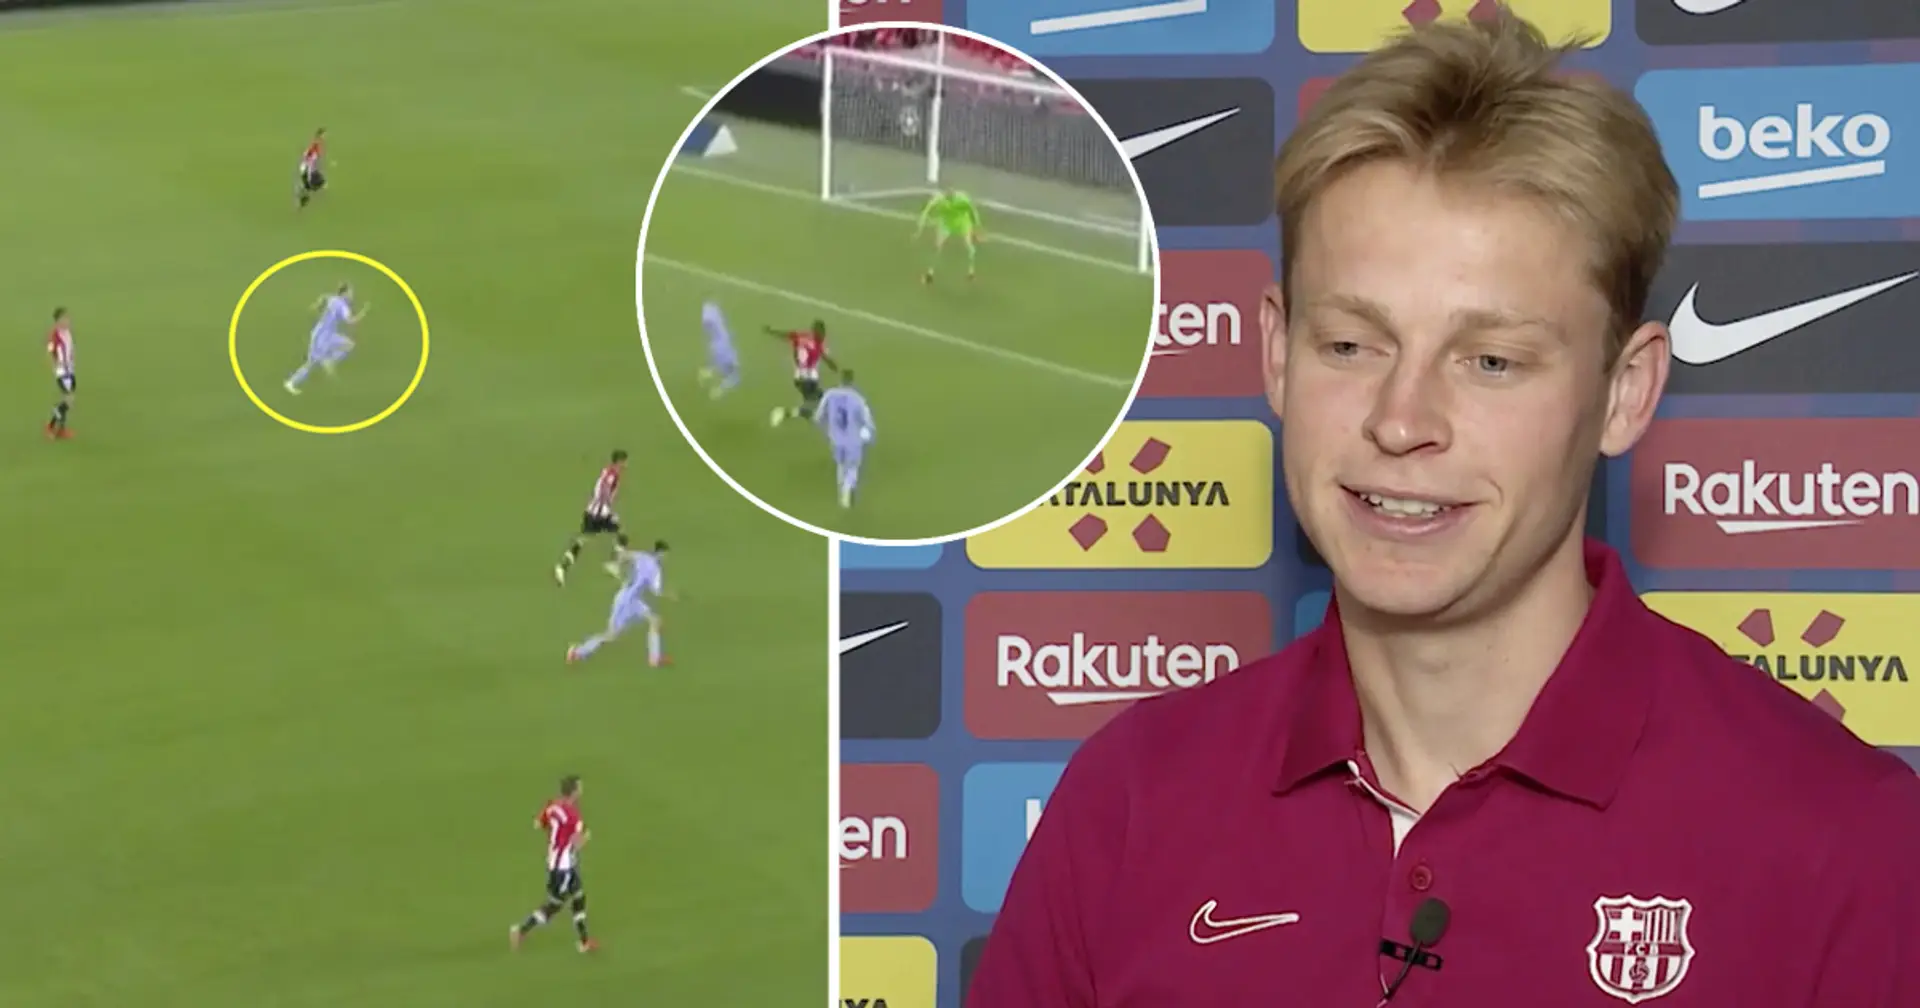 De Jong runs out from nowhere to prevent Bilbao from scoring early goal